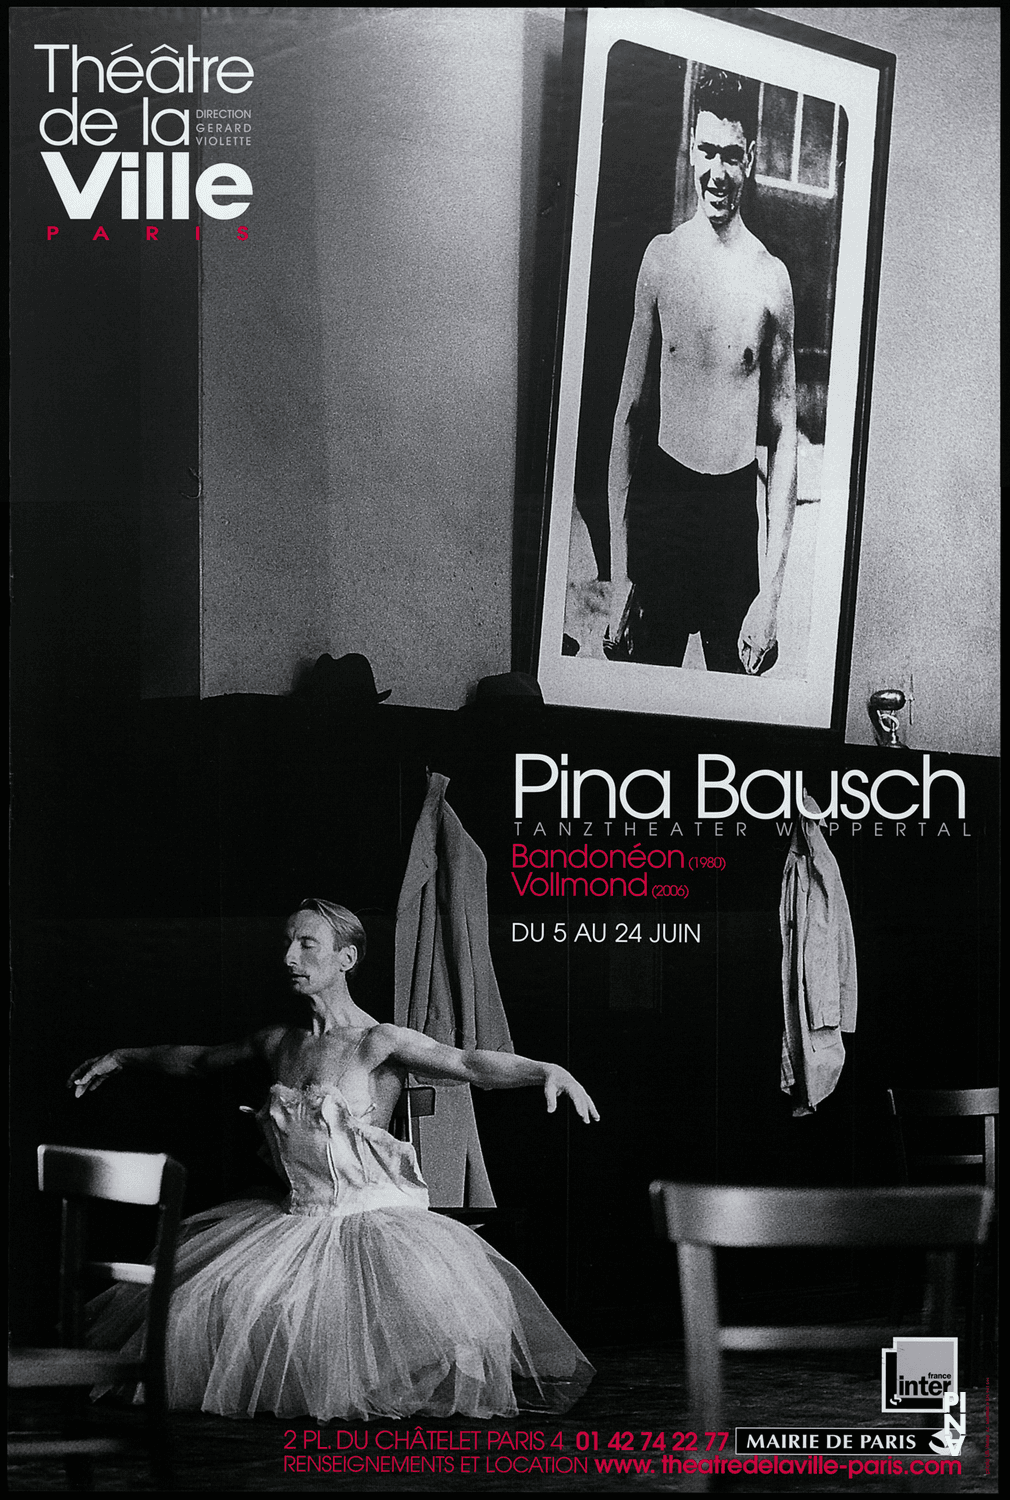 Poster for “Bandoneon” and “Vollmond (Full Moon)” by Pina Bausch in Paris, 06/05/2007 – 06/24/2007